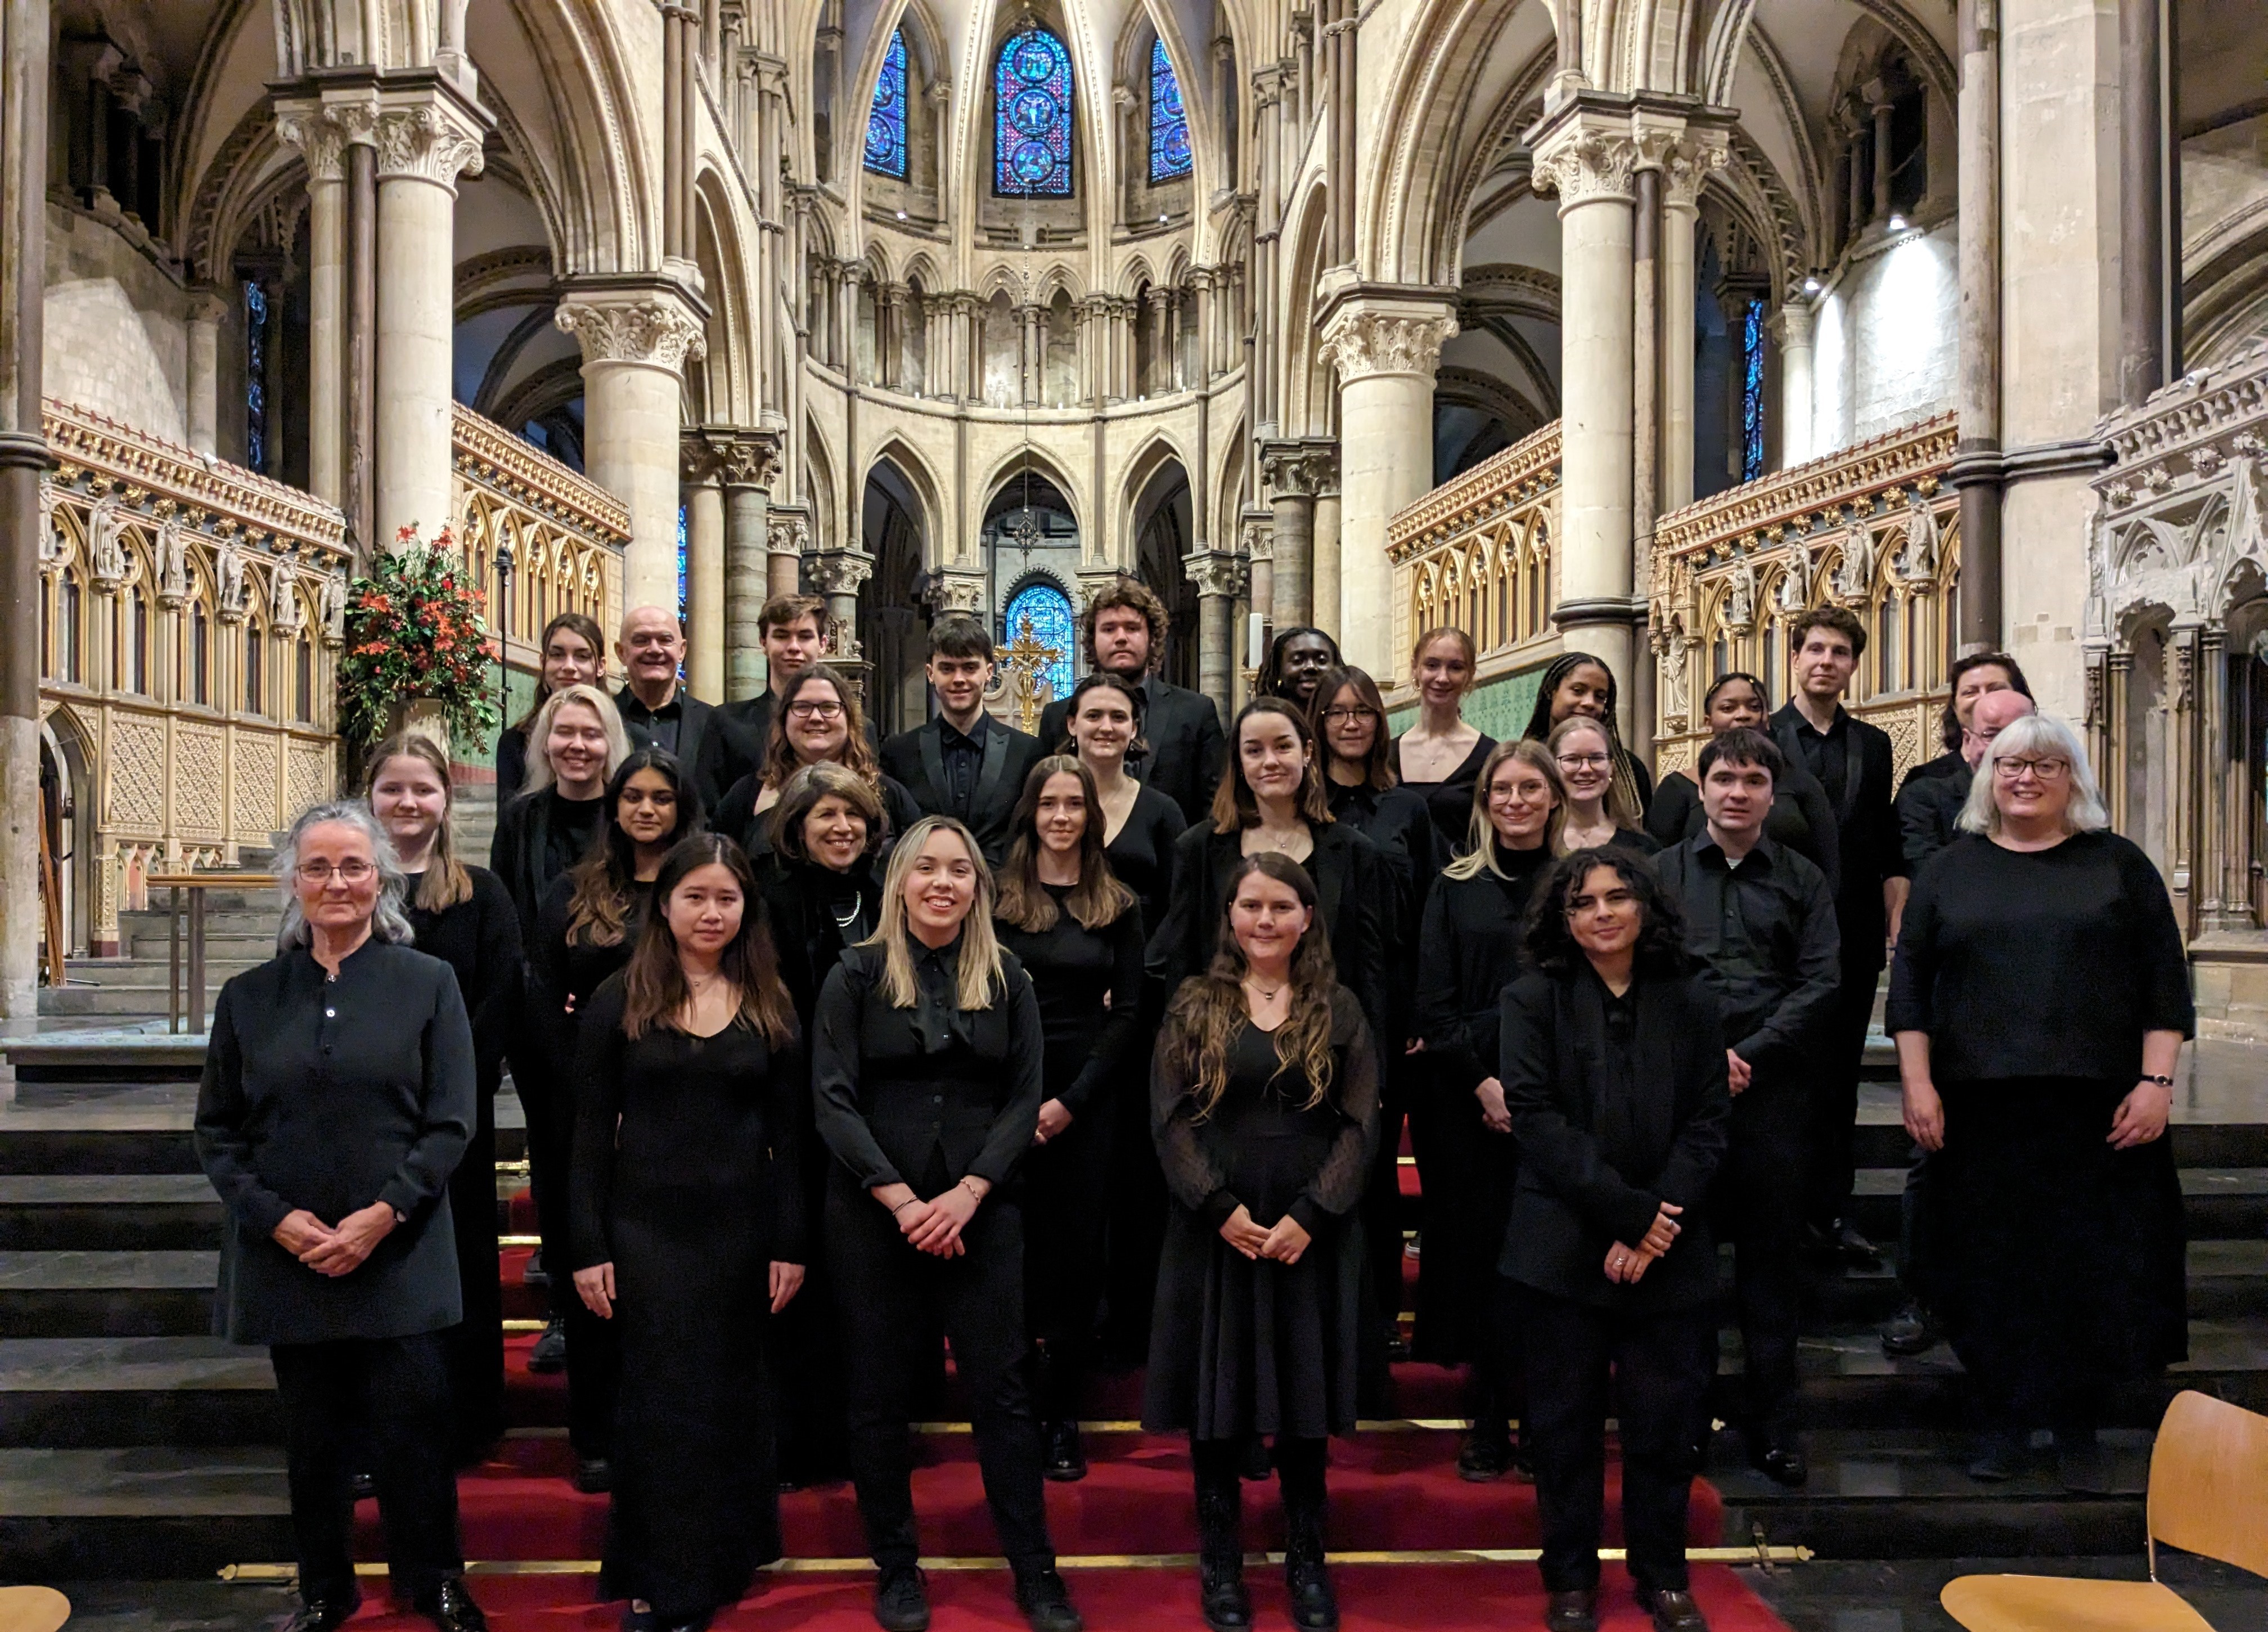 Group of thirty singers dressed in formal black standing on red-carpeted steps amidst the ornate architecture of Canterbury Catrhedral